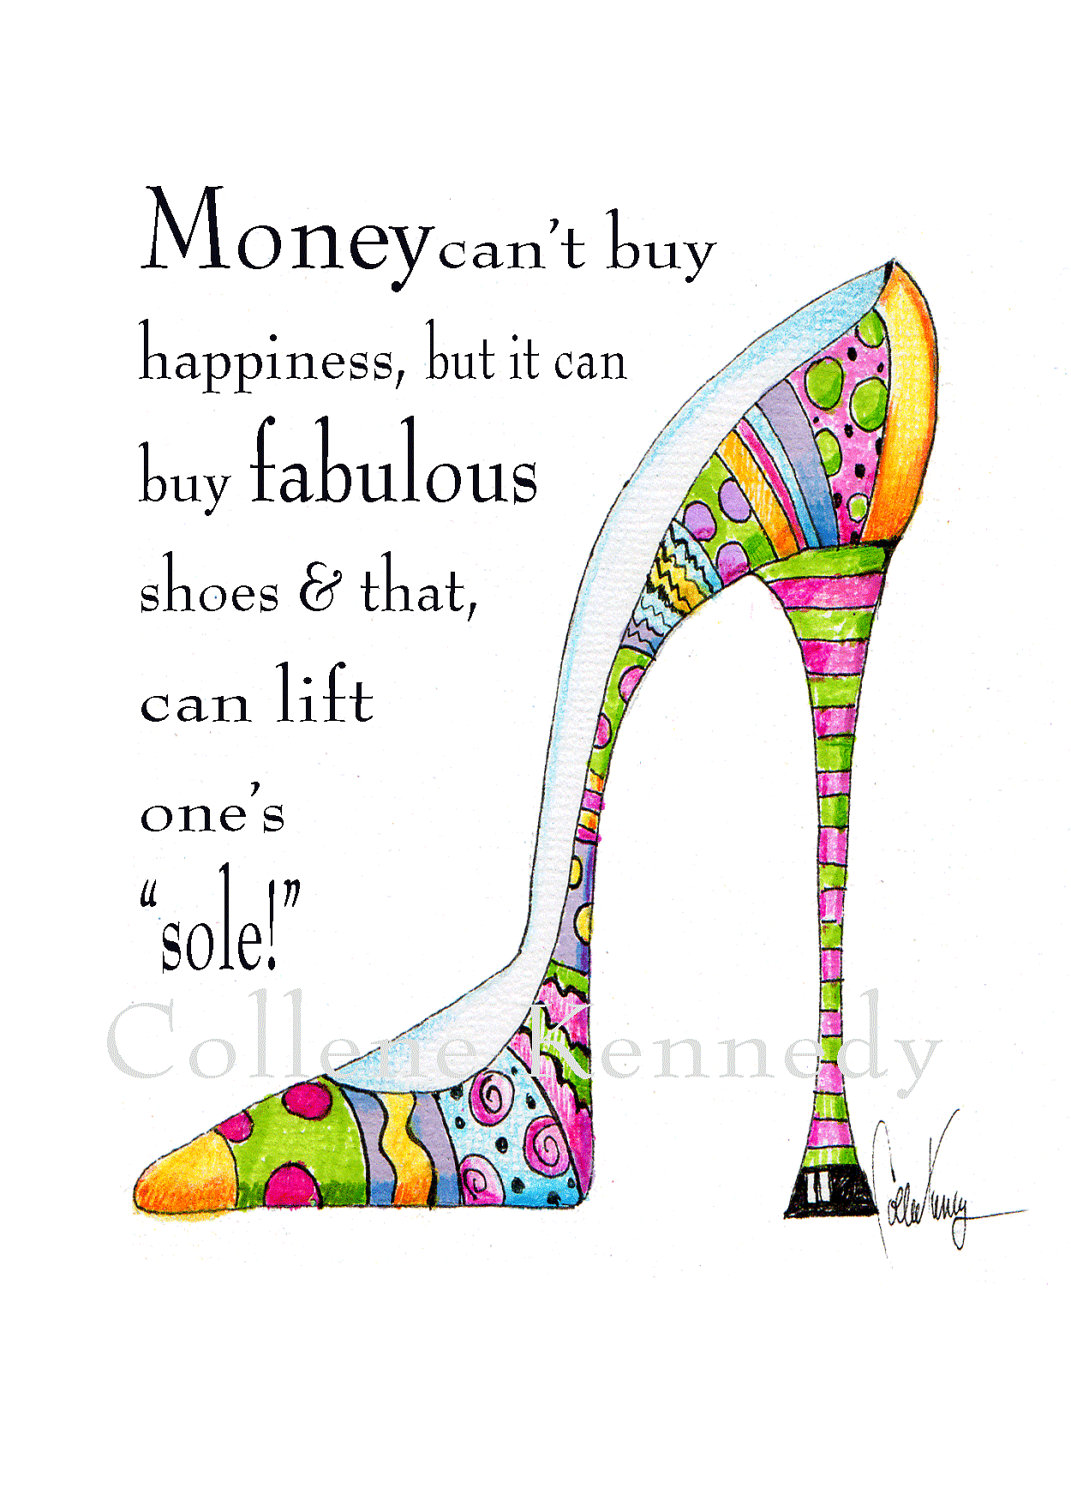 The Ultimate List Of Quotes For The Shoe Lover In All Of Us – Life Traveled  In Stilettos | Shoe lover, Heels quotes, Shoes quotes